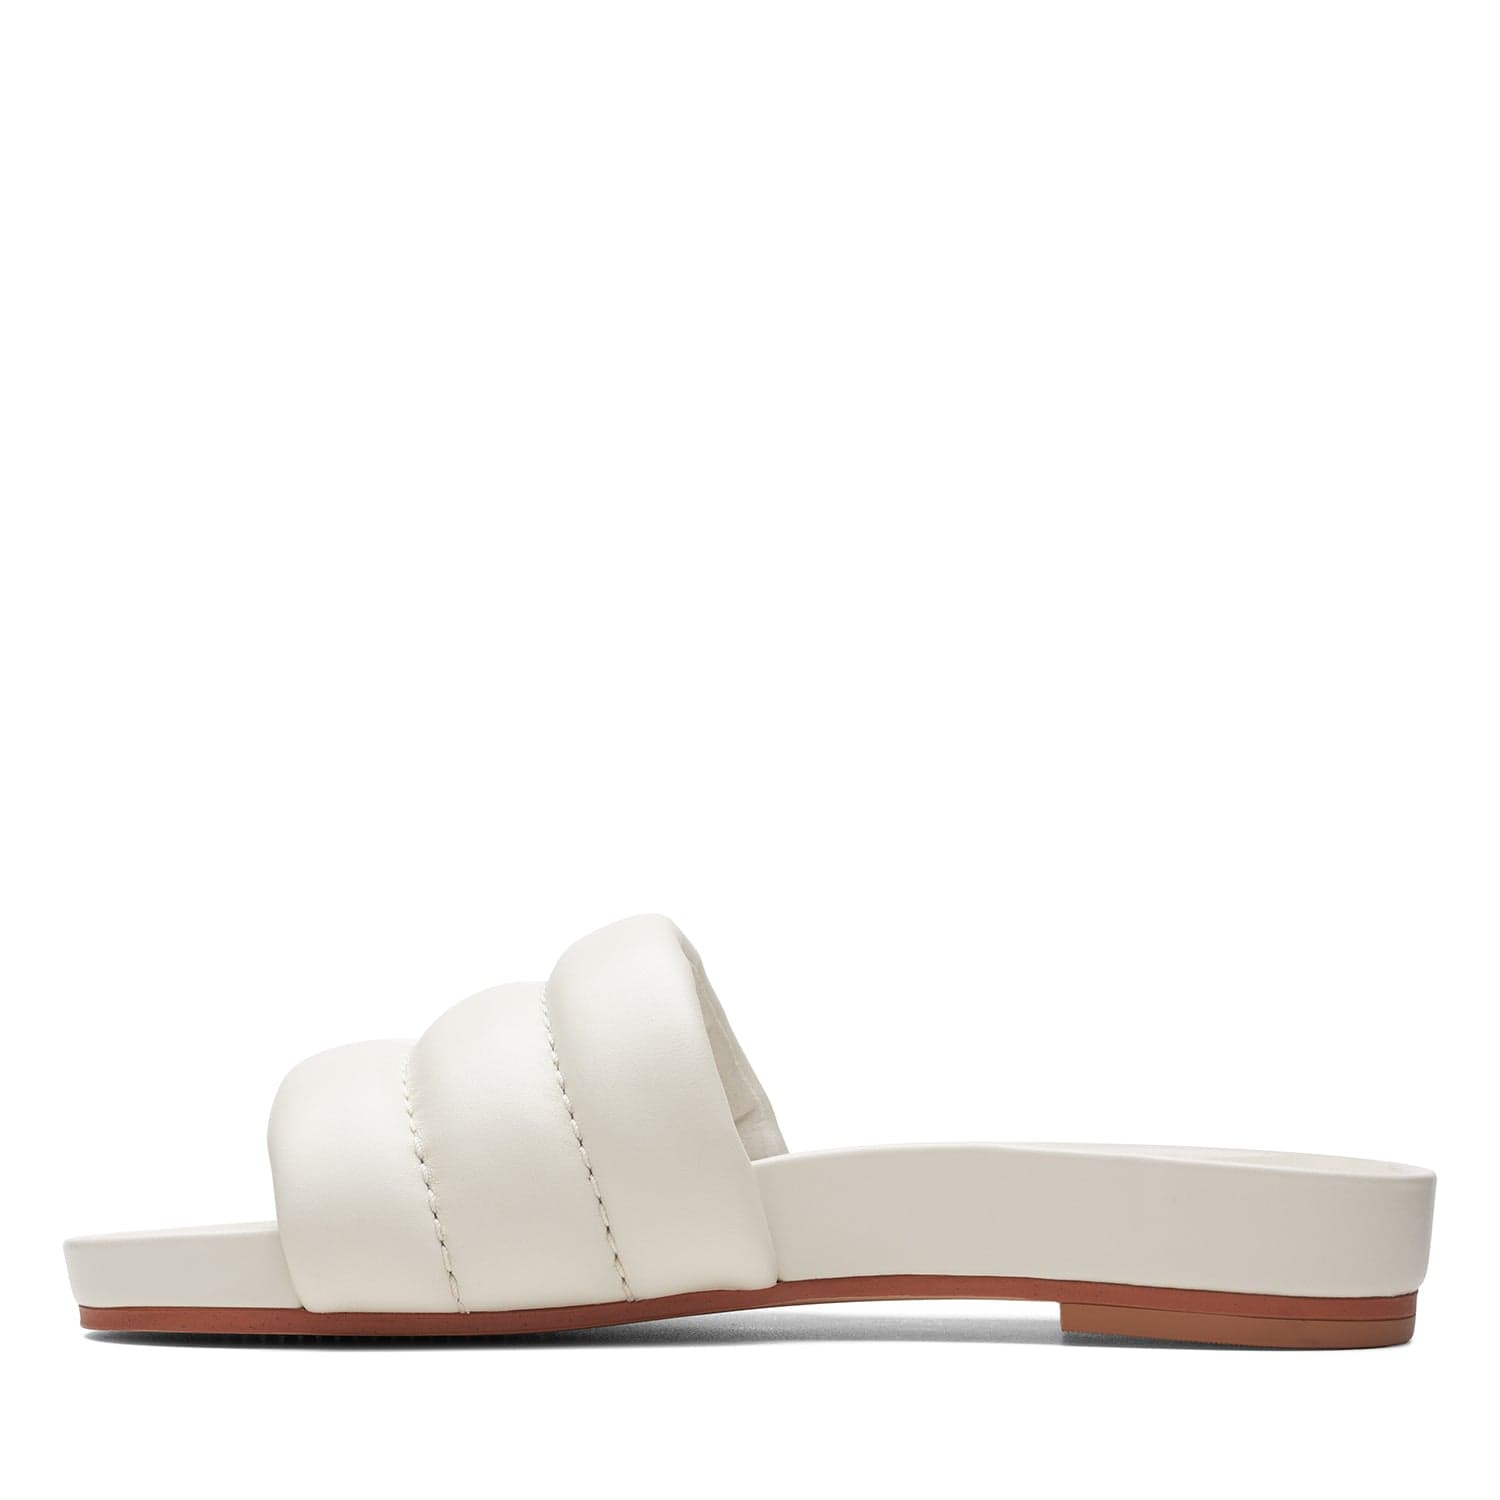 Clarks Pure Soft - Sandals - Off White Leather - 261737014 - D Width (Standard Fit)